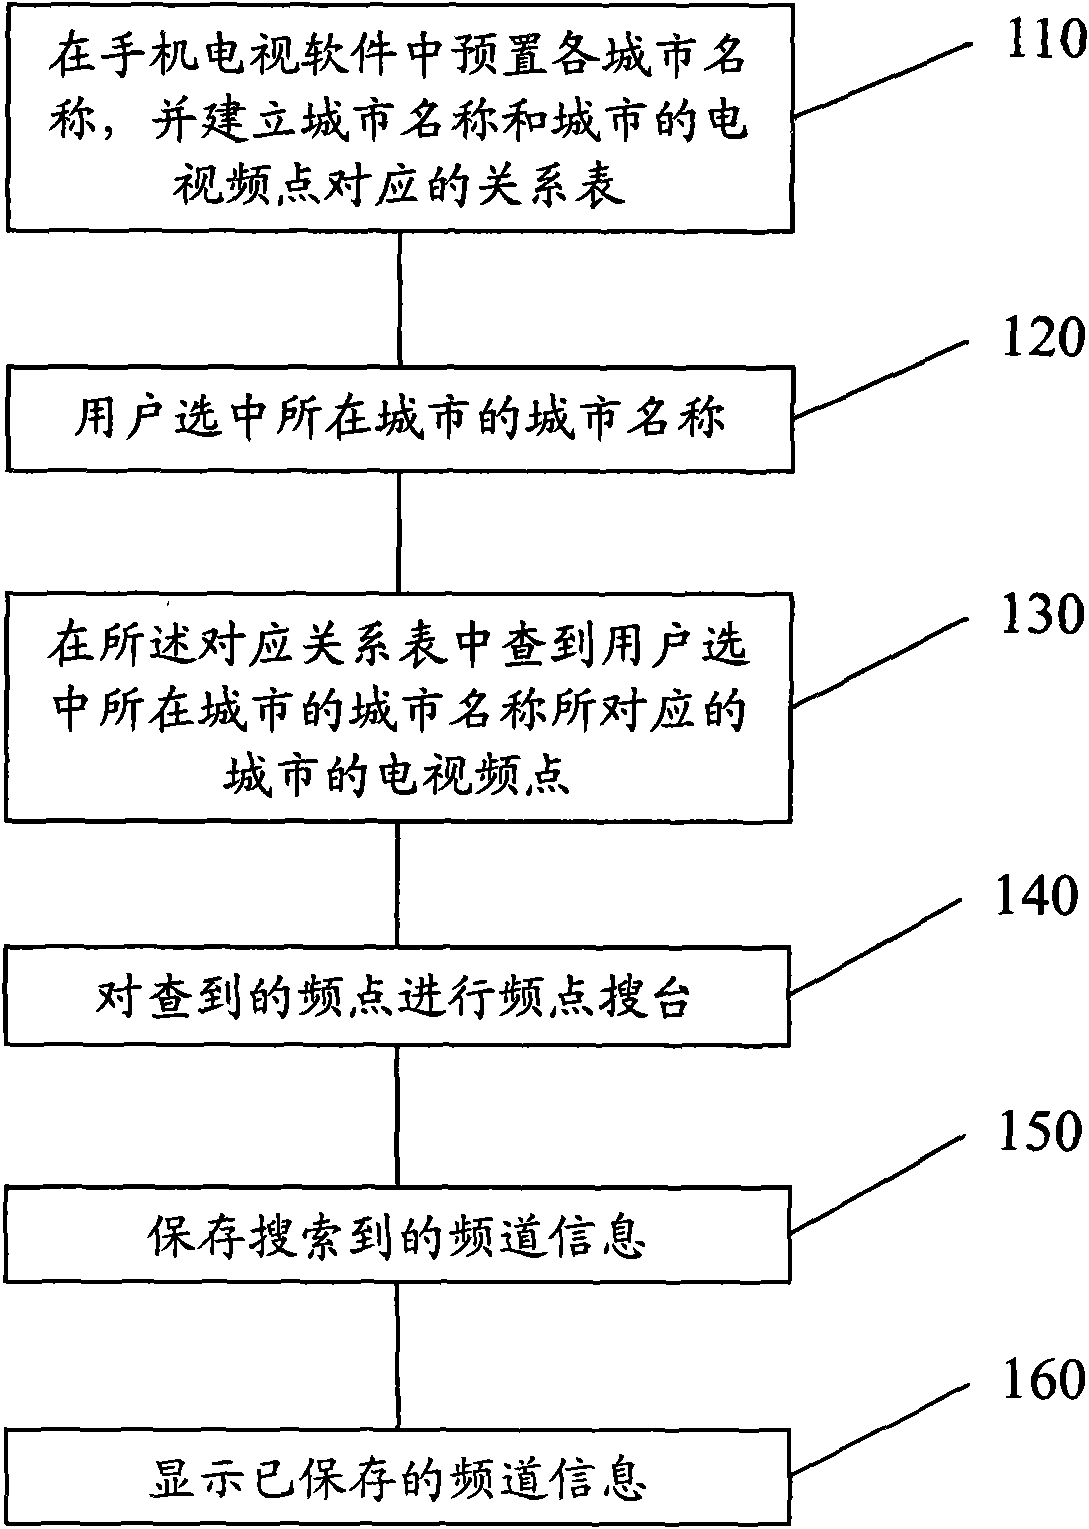 Method for searching for mobile phone television channels